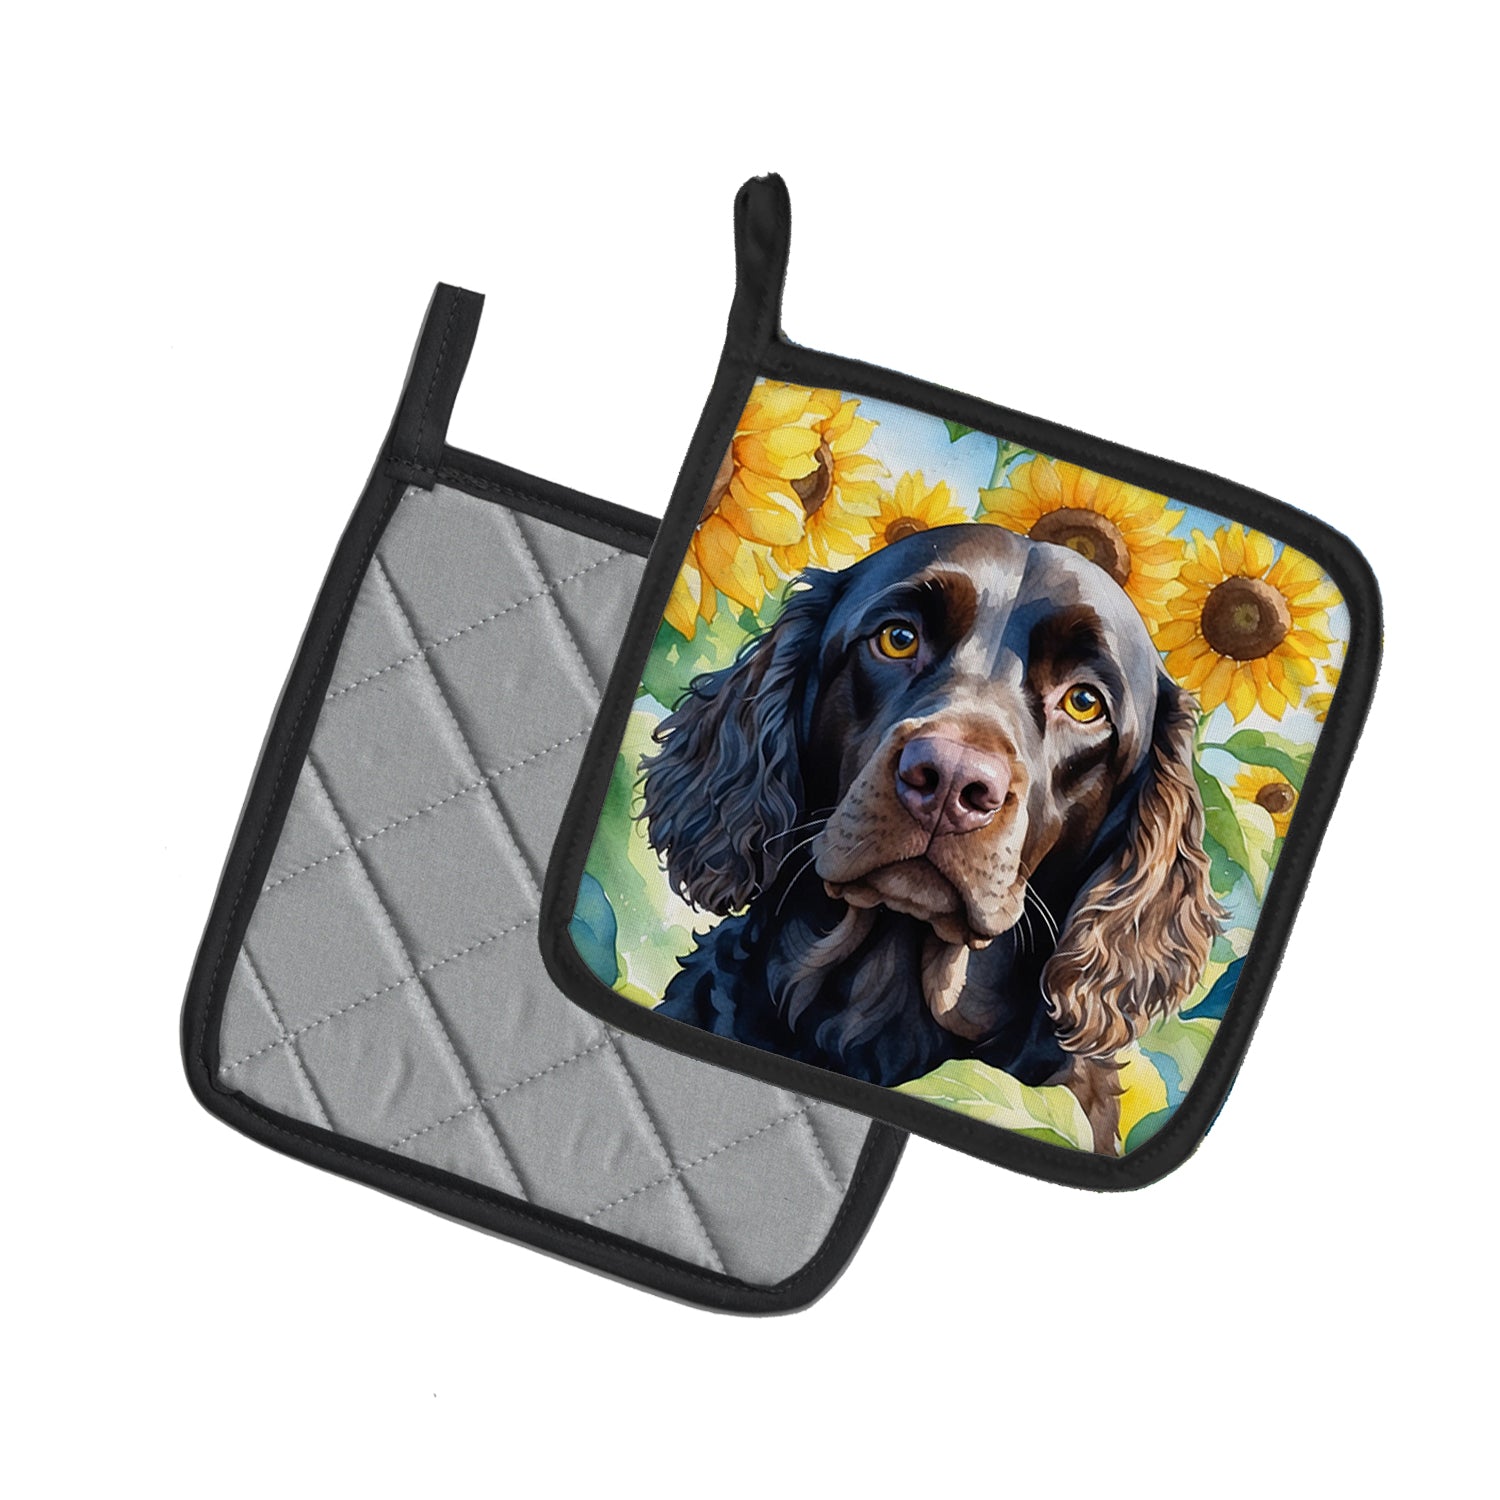 Buy this American Water Spaniel in Sunflowers Pair of Pot Holders